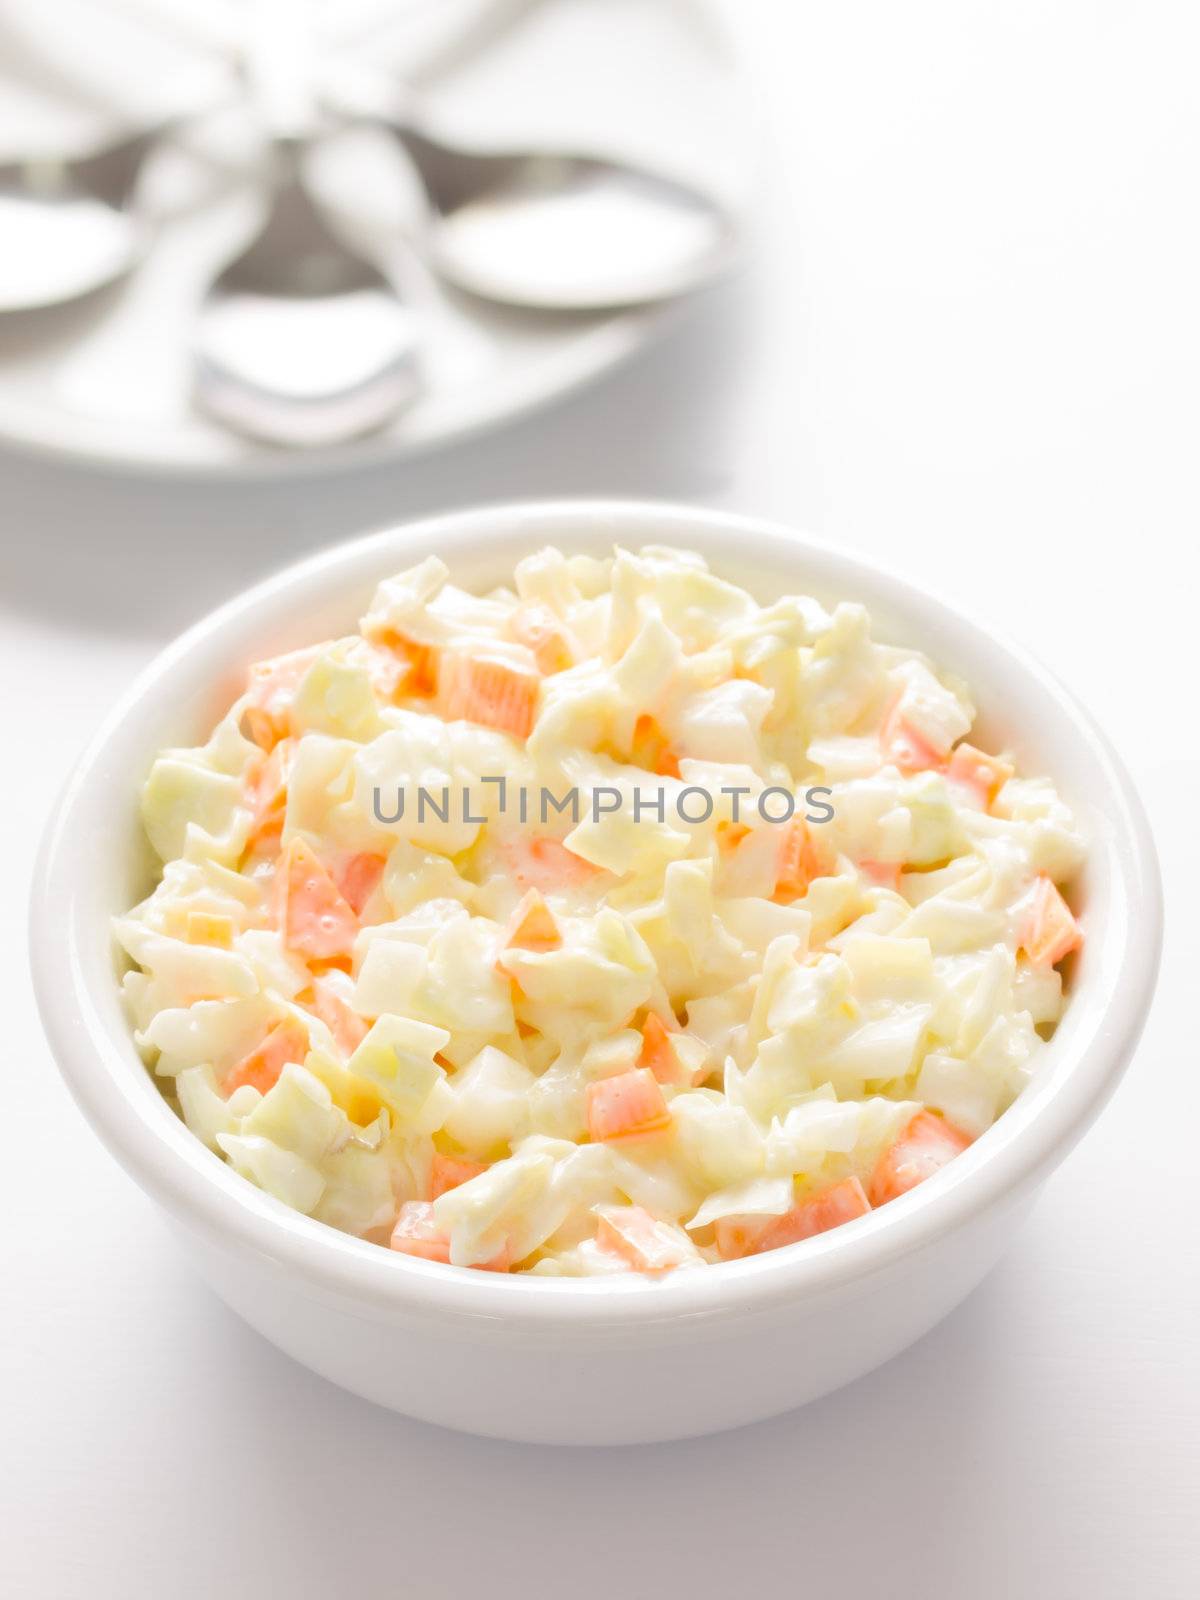 close up of a bowl of coleslaw salad